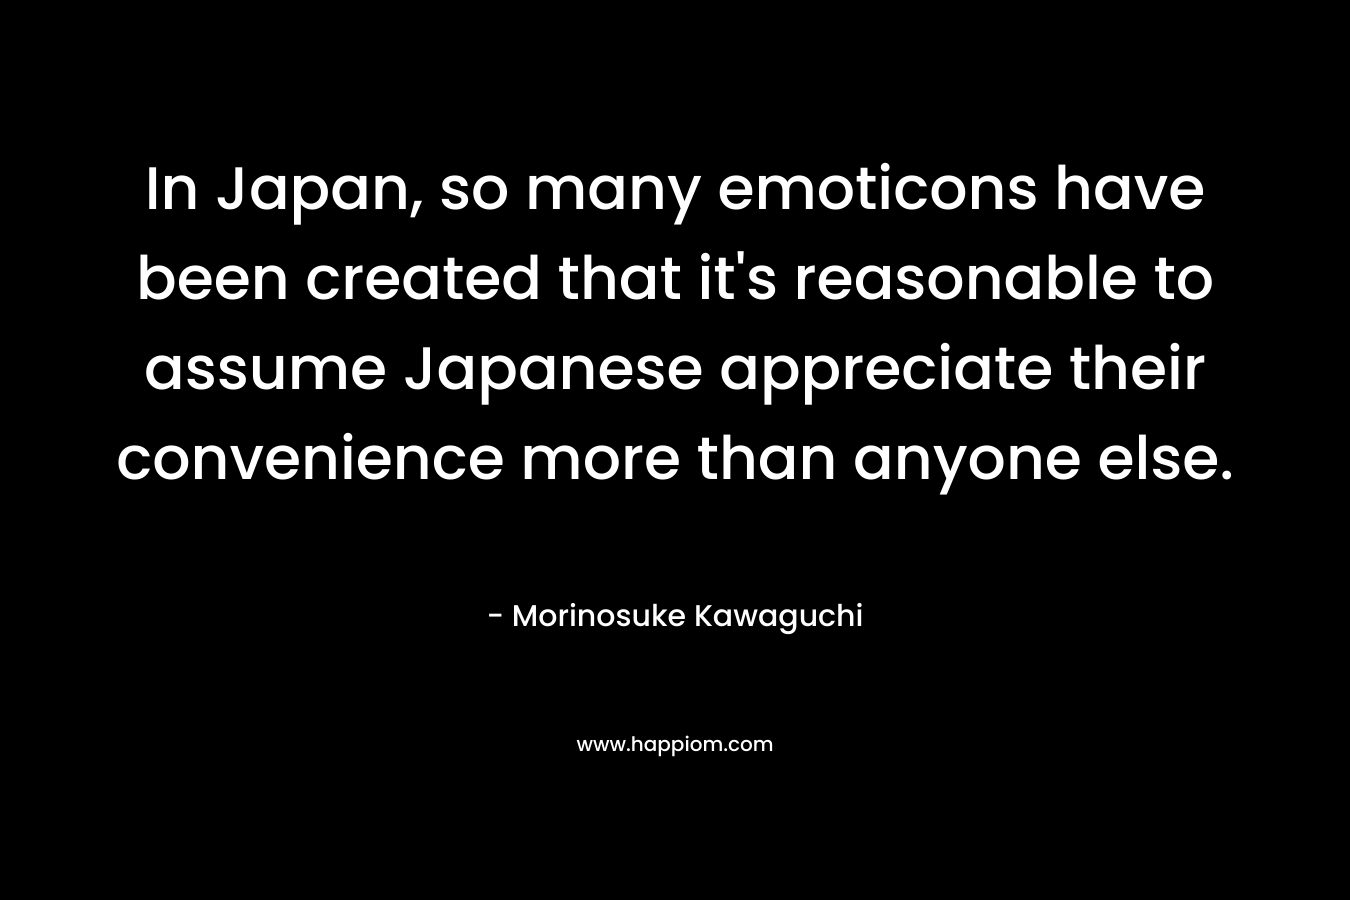 In Japan, so many emoticons have been created that it’s reasonable to assume Japanese appreciate their convenience more than anyone else. – Morinosuke Kawaguchi